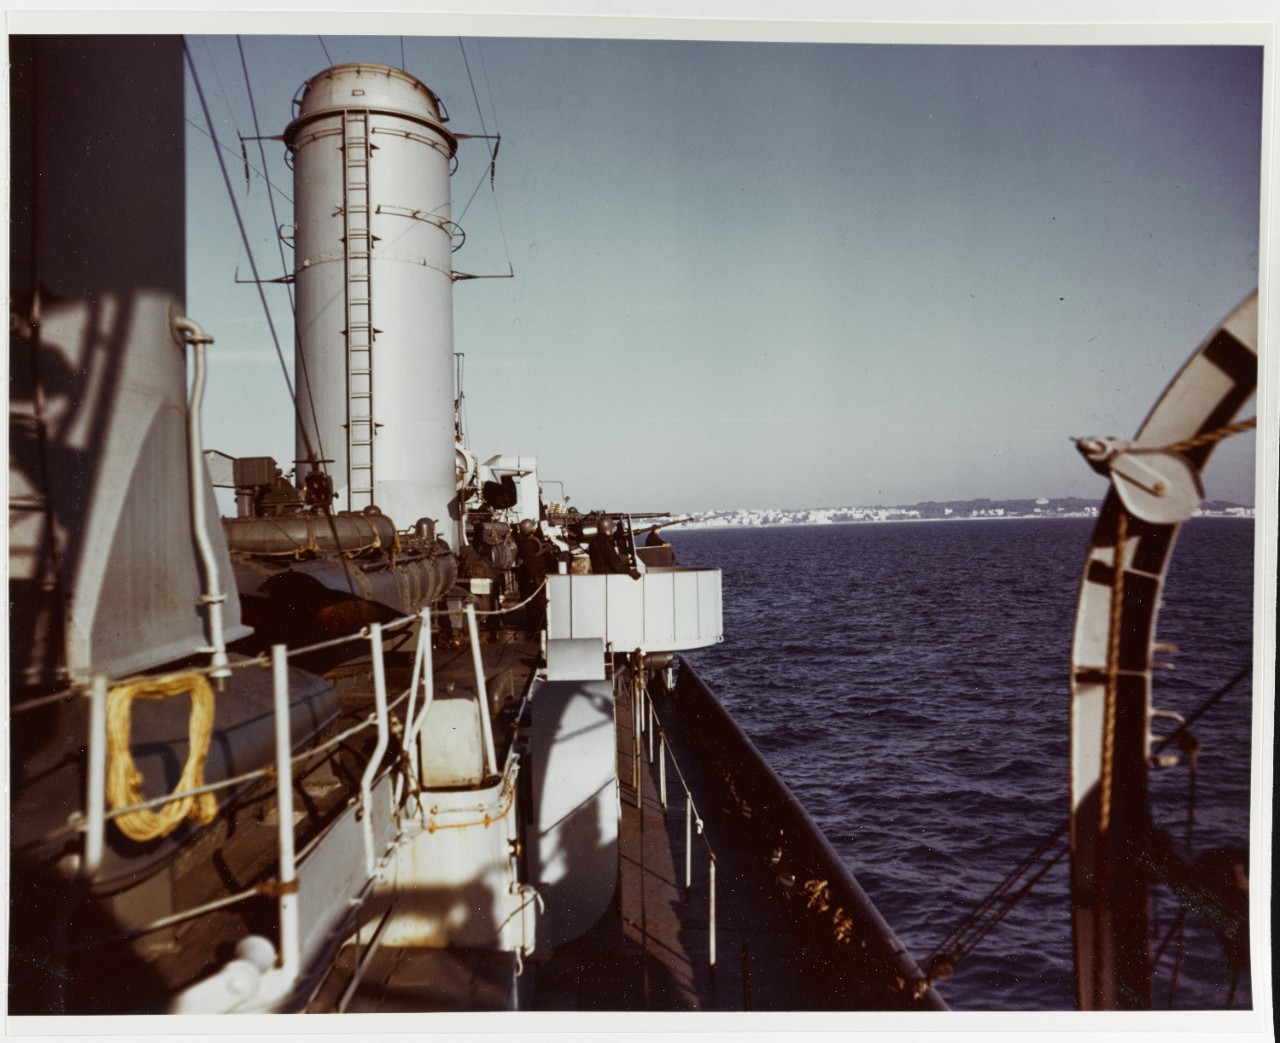 Livermore’s gun crews stand alert during a patrol of the waters off Anzio, which can be seen in the background, circa March 1944 by Combat Photo Unit Ten. (U.S. Navy Photograph 80-G-K-13779, National Archives and Records Administration, Still Pictures Division, College Park, Md.)